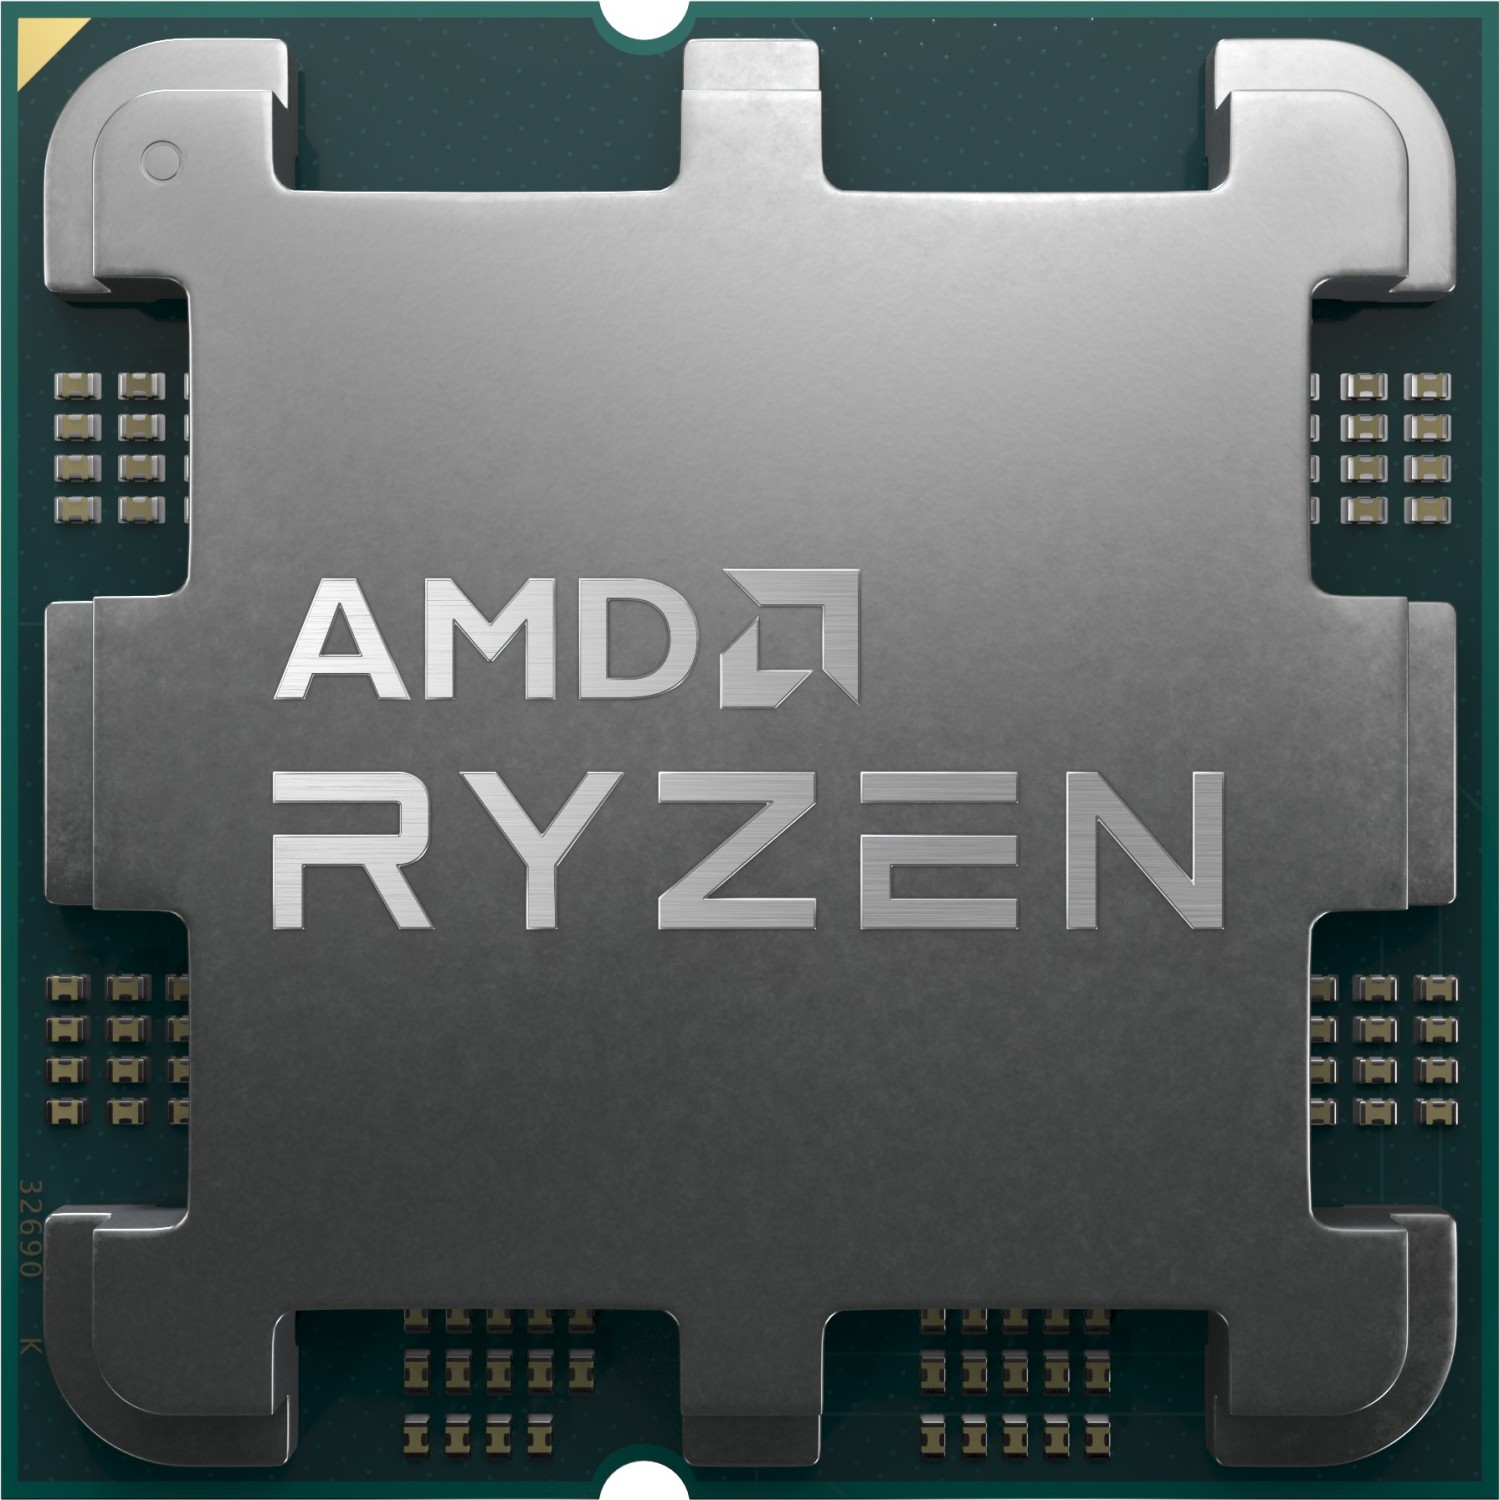 AMD Ryzen 5 7500F review: a great value gaming CPU if you can get